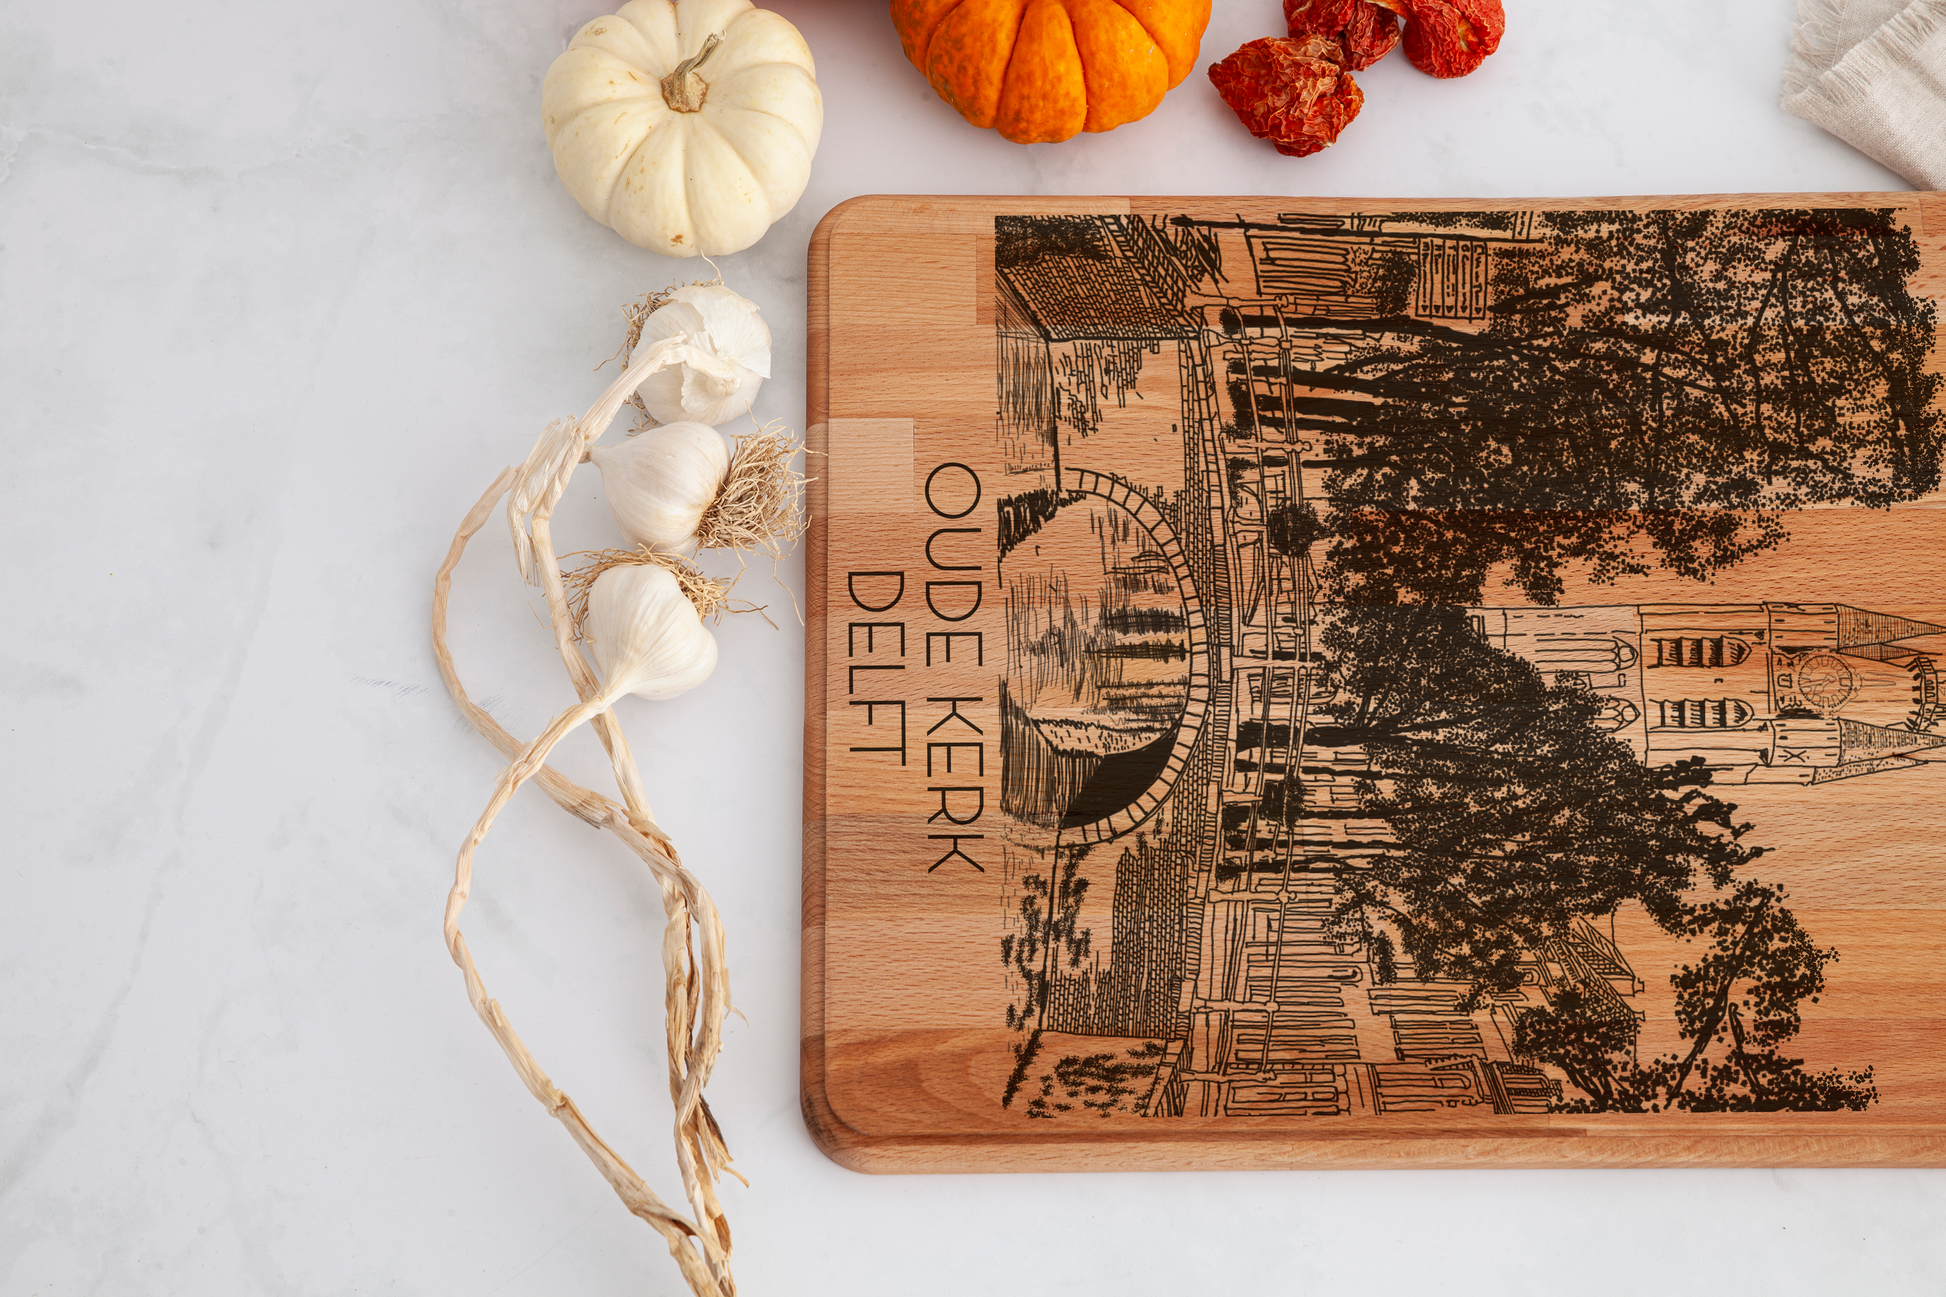 Delft, Oude Kerk, cutting board, antimicrobial